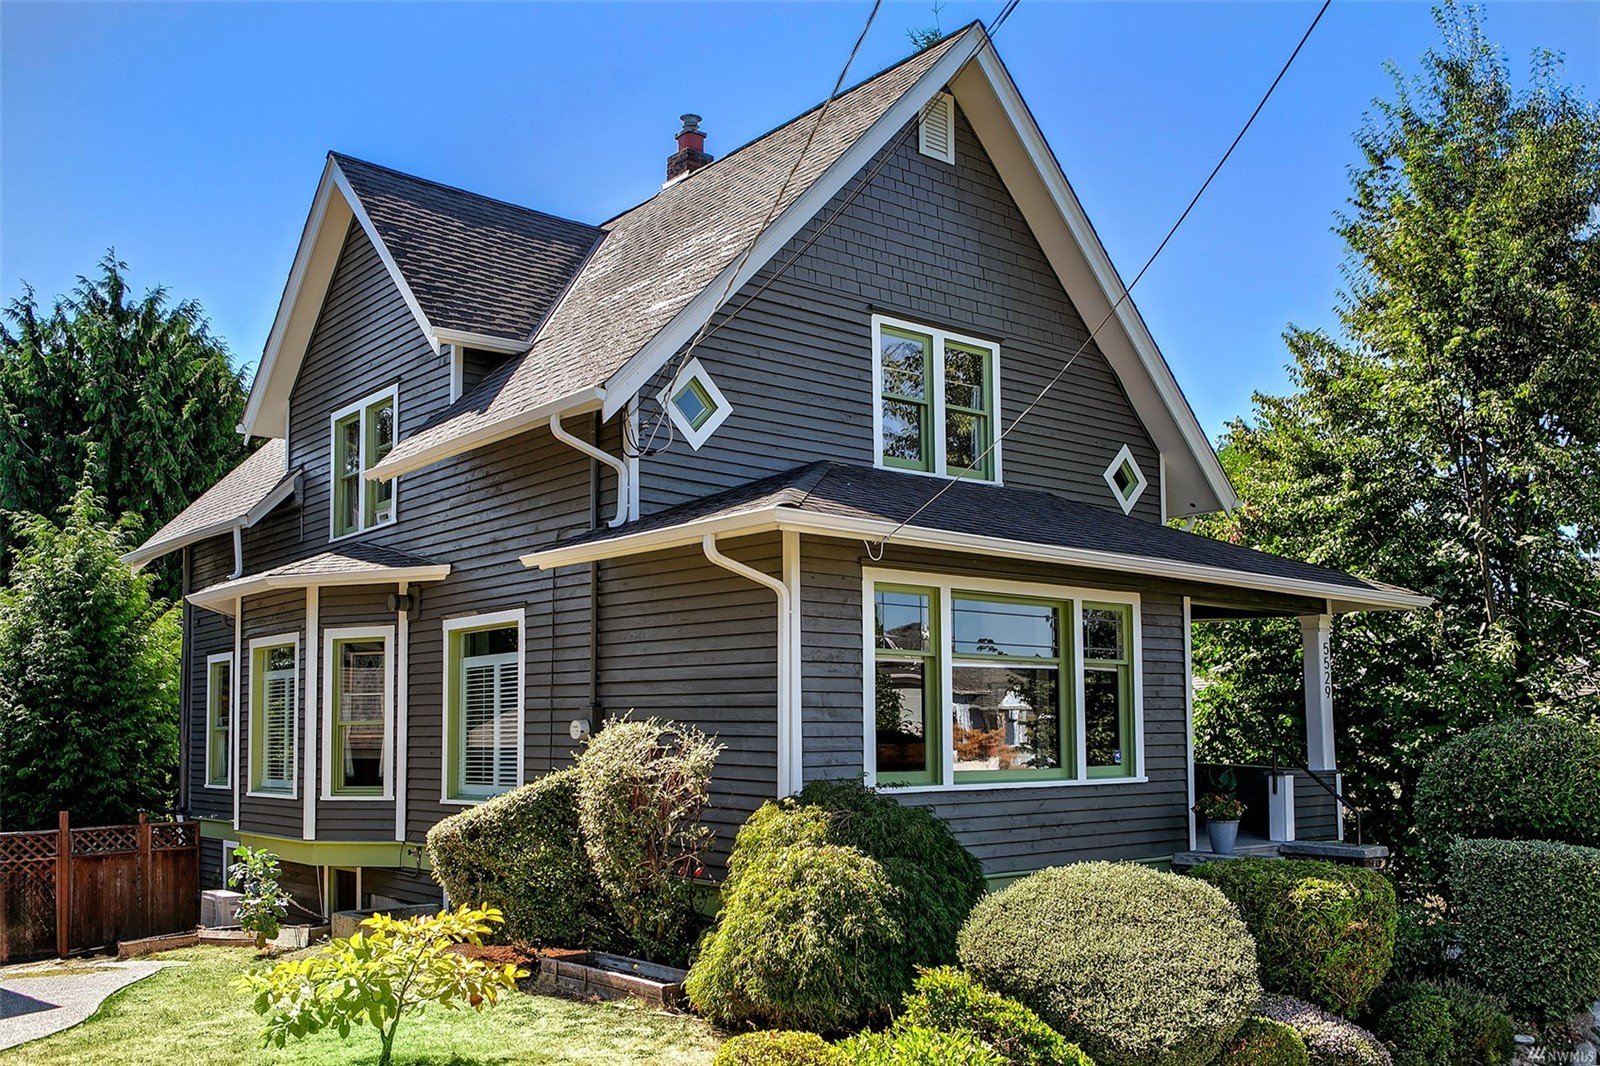 This American Craftsman home is two stories plus a basement